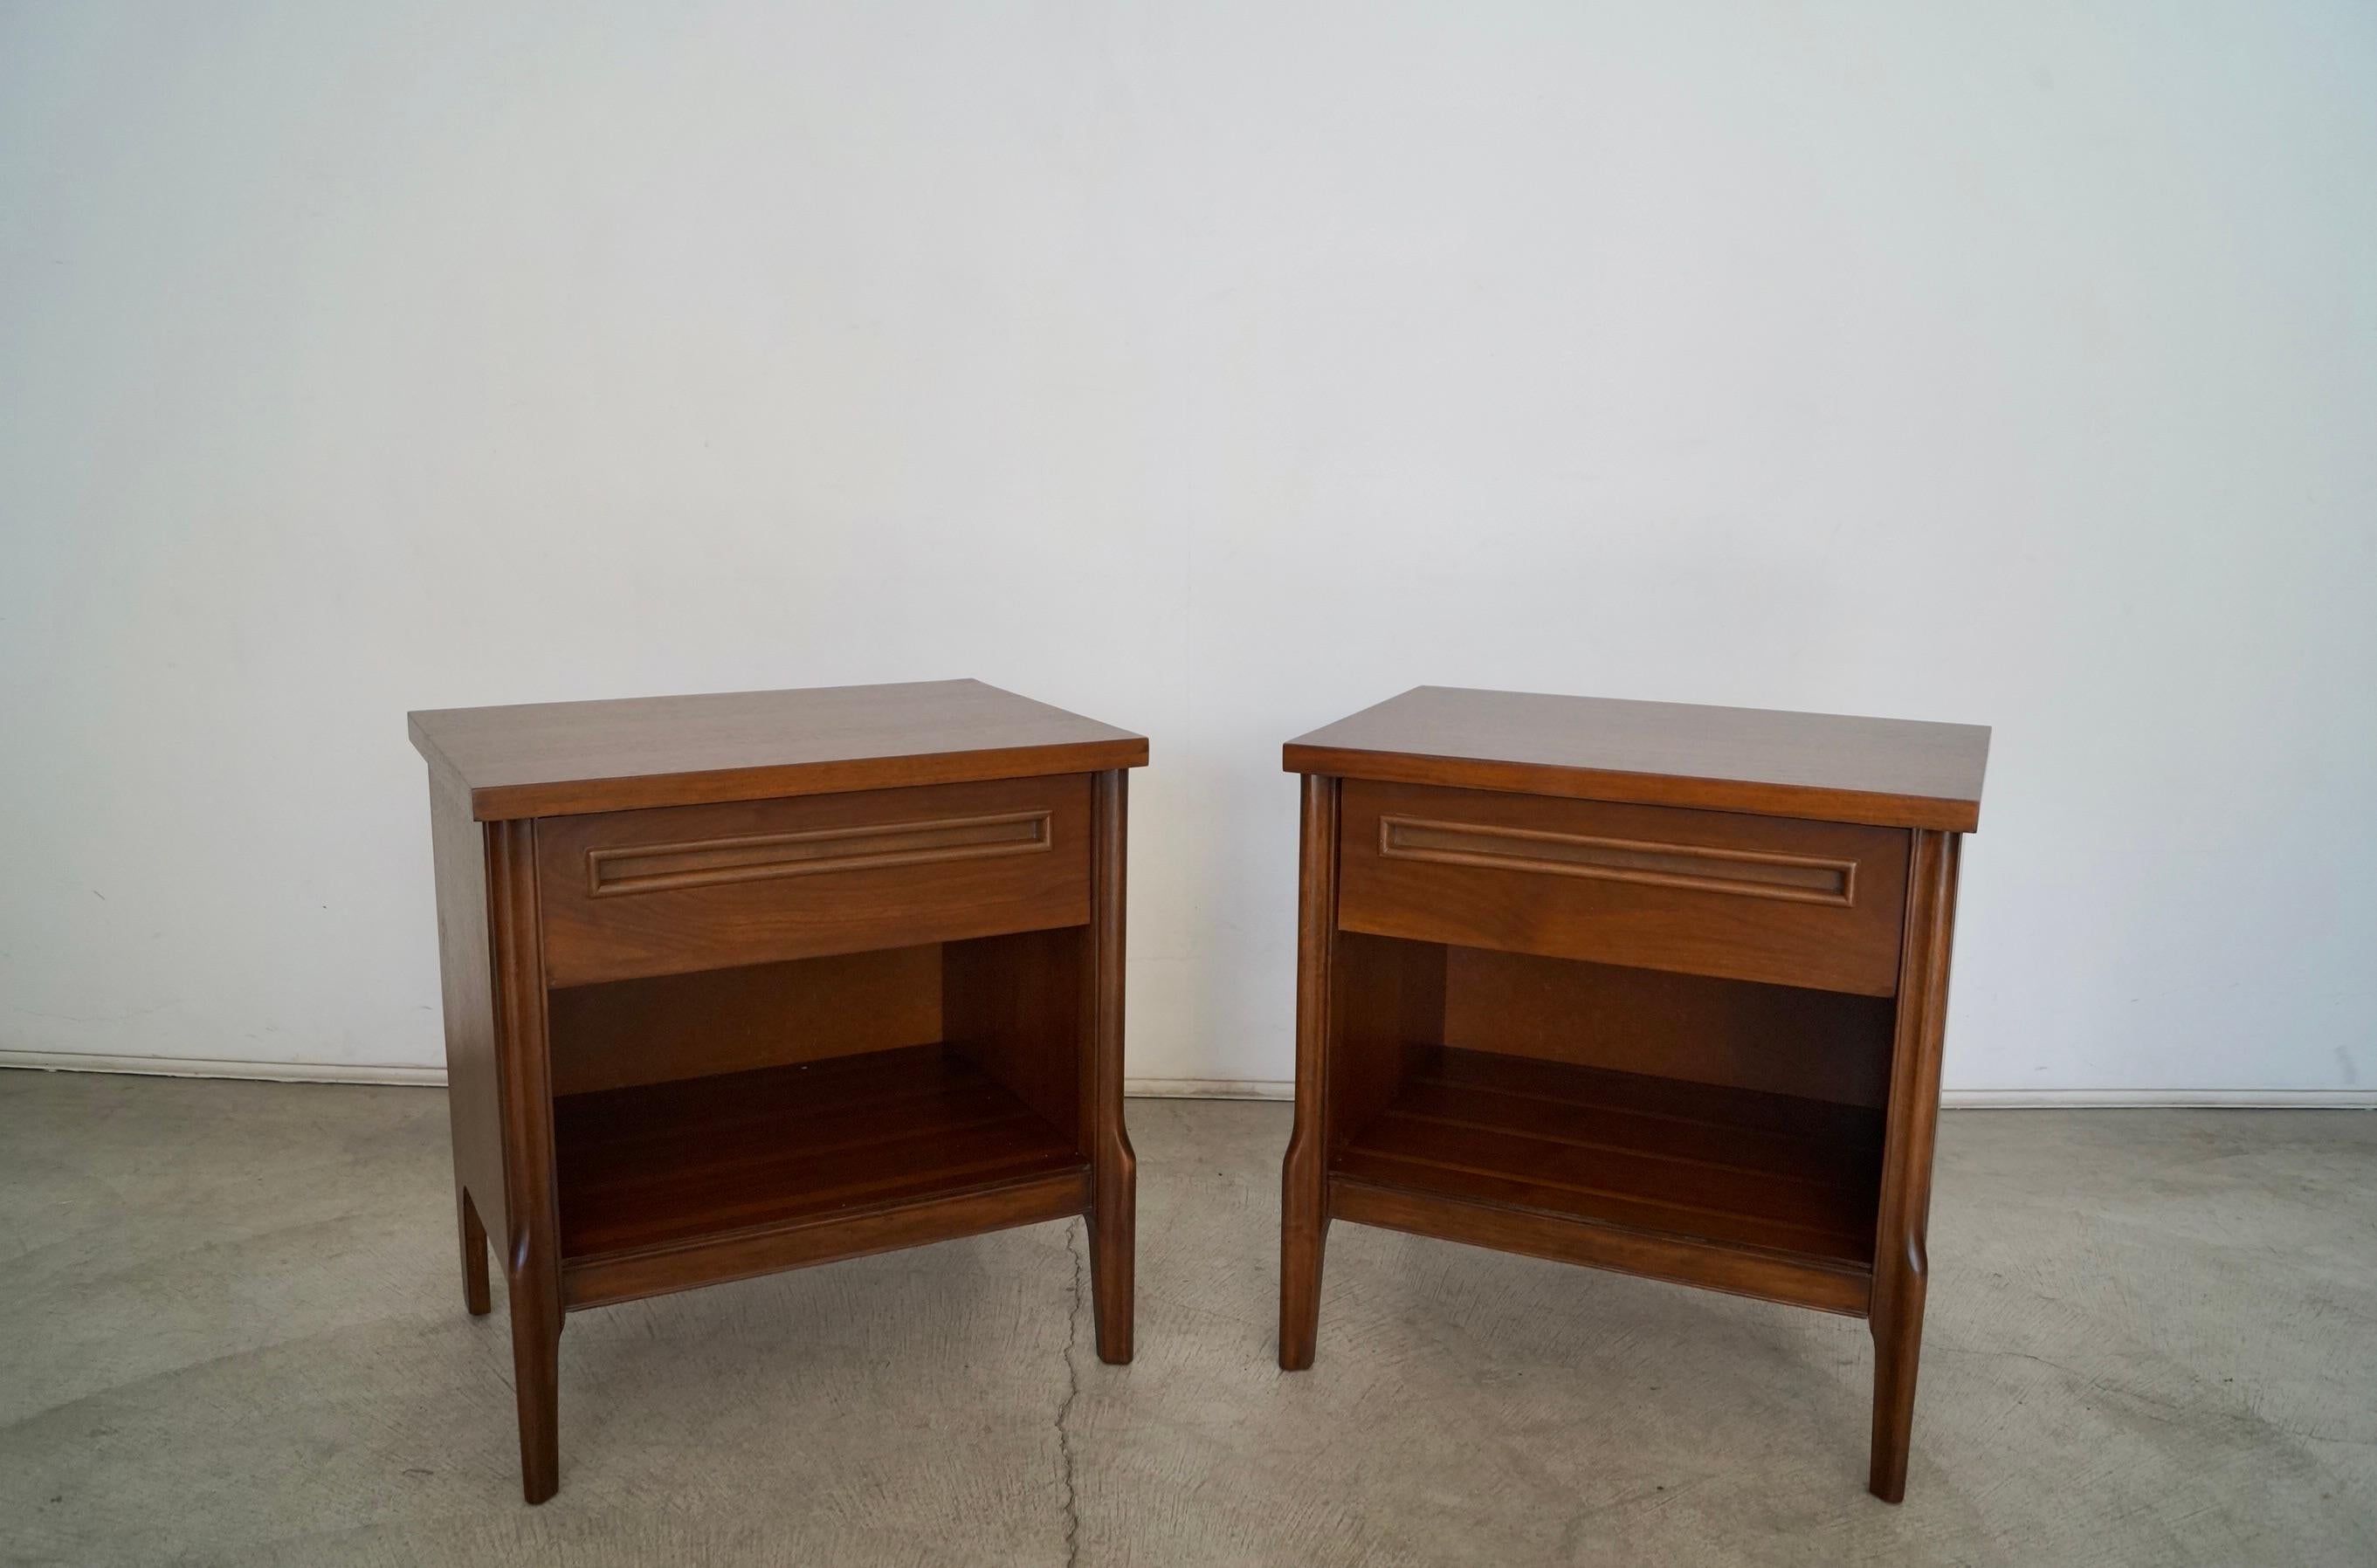 Pair of 1960s Mid-Century Modern Walnut Nightstands In Excellent Condition For Sale In Burbank, CA